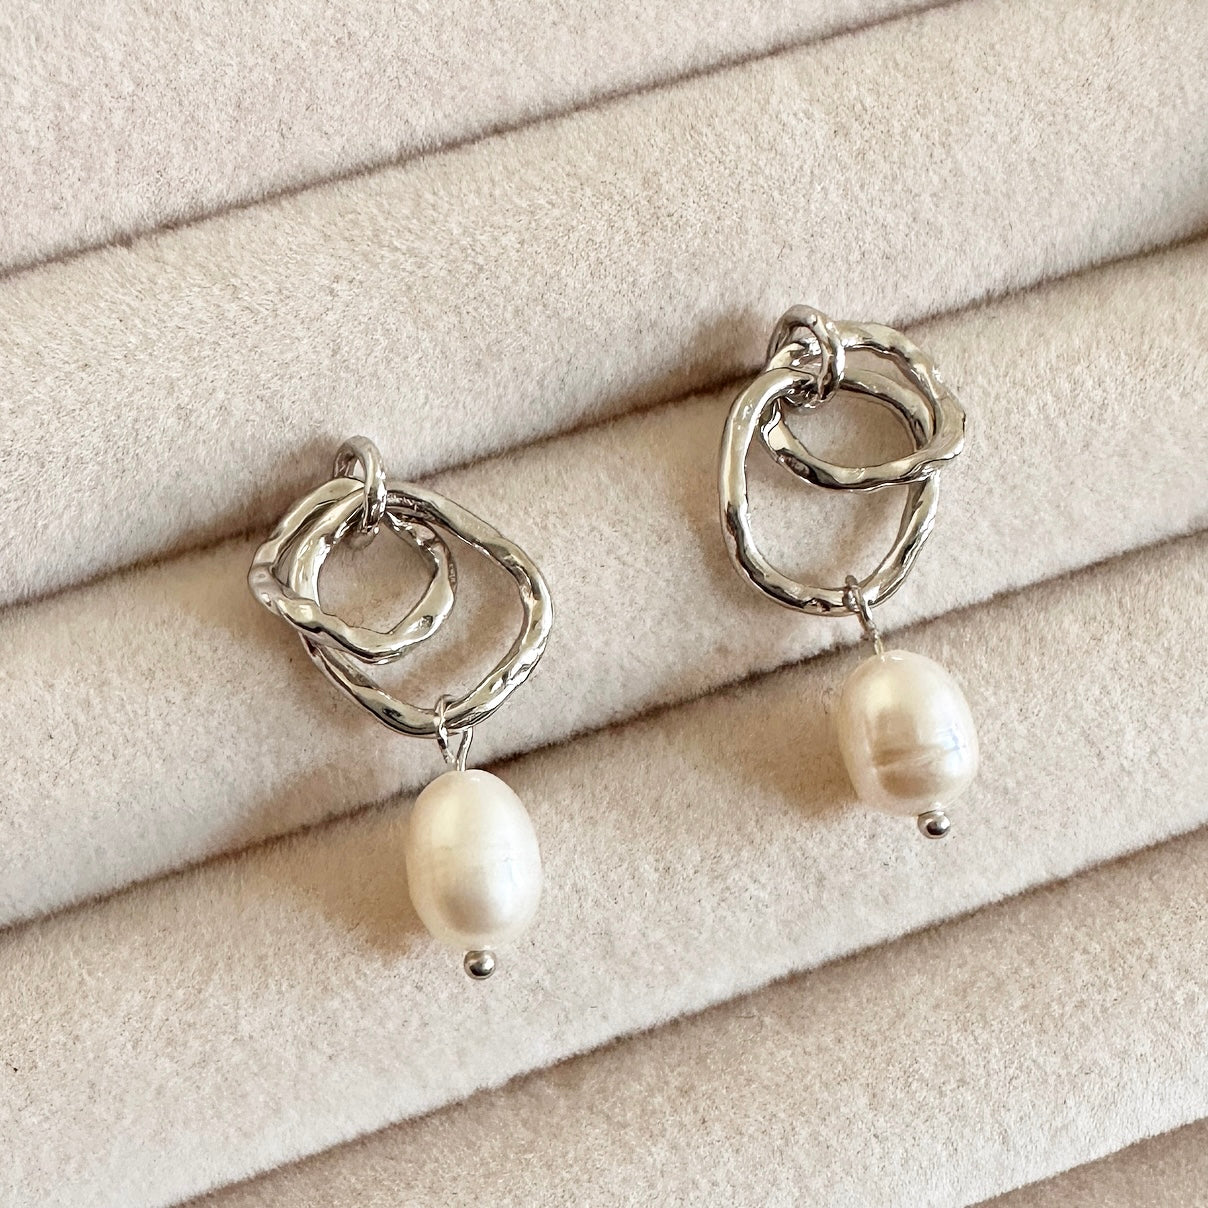 Be graceful and stylish with these captivating Mina Pearl Drop Earrings. Crafted with 925 sterling silver and freshwater pearl, these earrings exude an aura of elegance and charm. Perfect for the day or evening. Earring Drop 3cm Sterling Silver